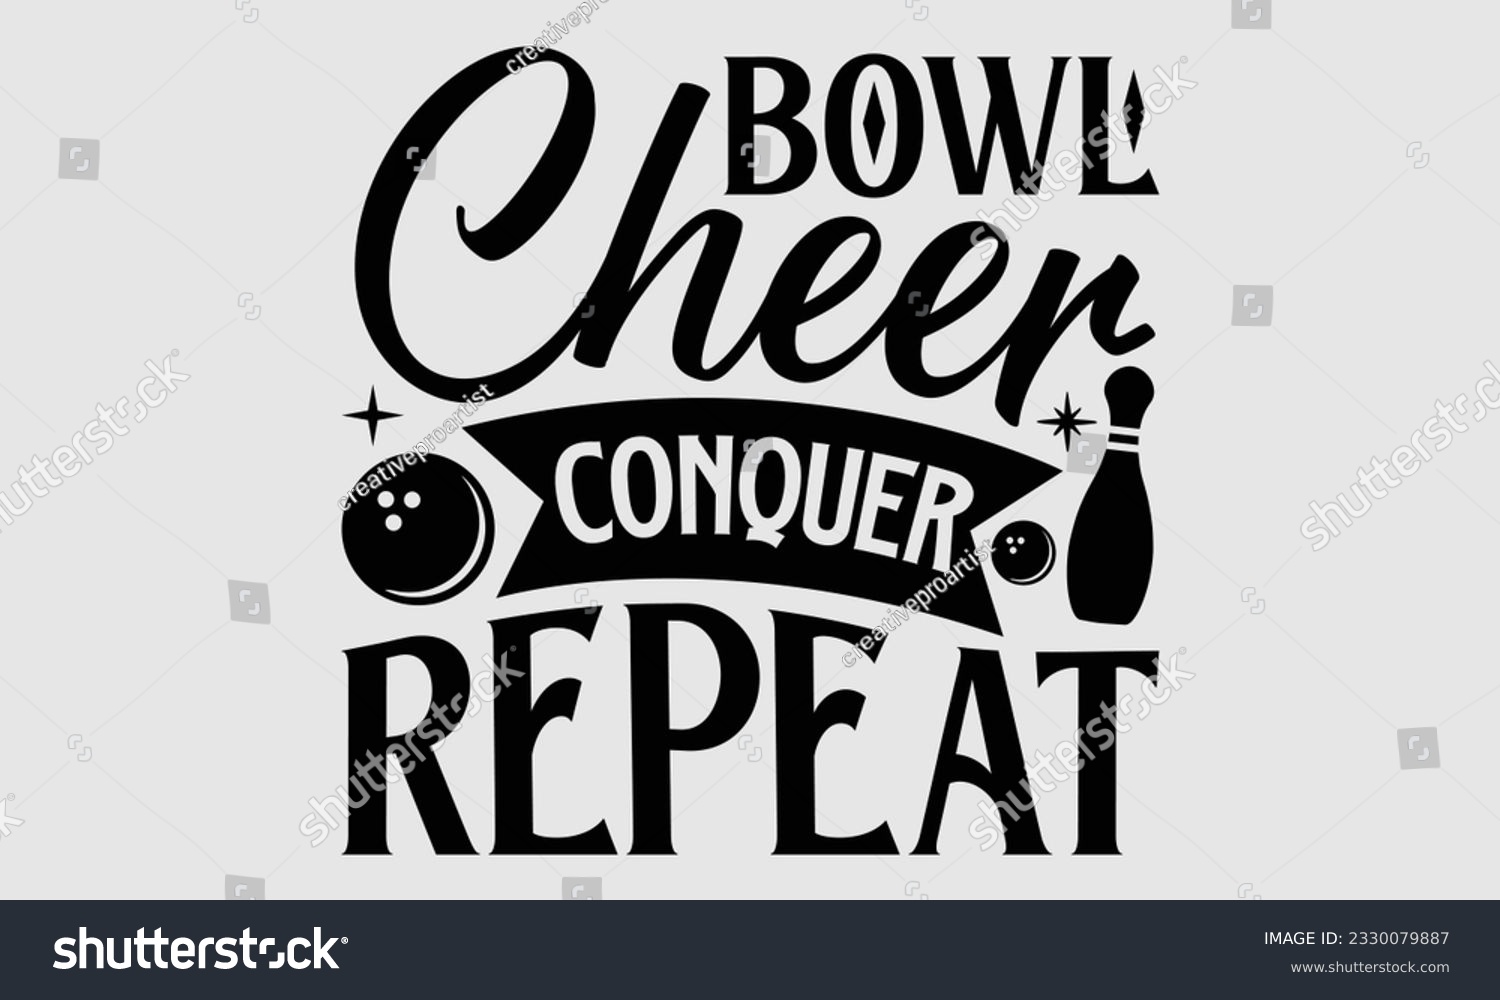 SVG of Bowl Cheer Conquer Repeat- Bowling t-shirt design, Handmade calligraphy vector Illustration for prints on SVG and bags, posters, greeting card template EPS svg